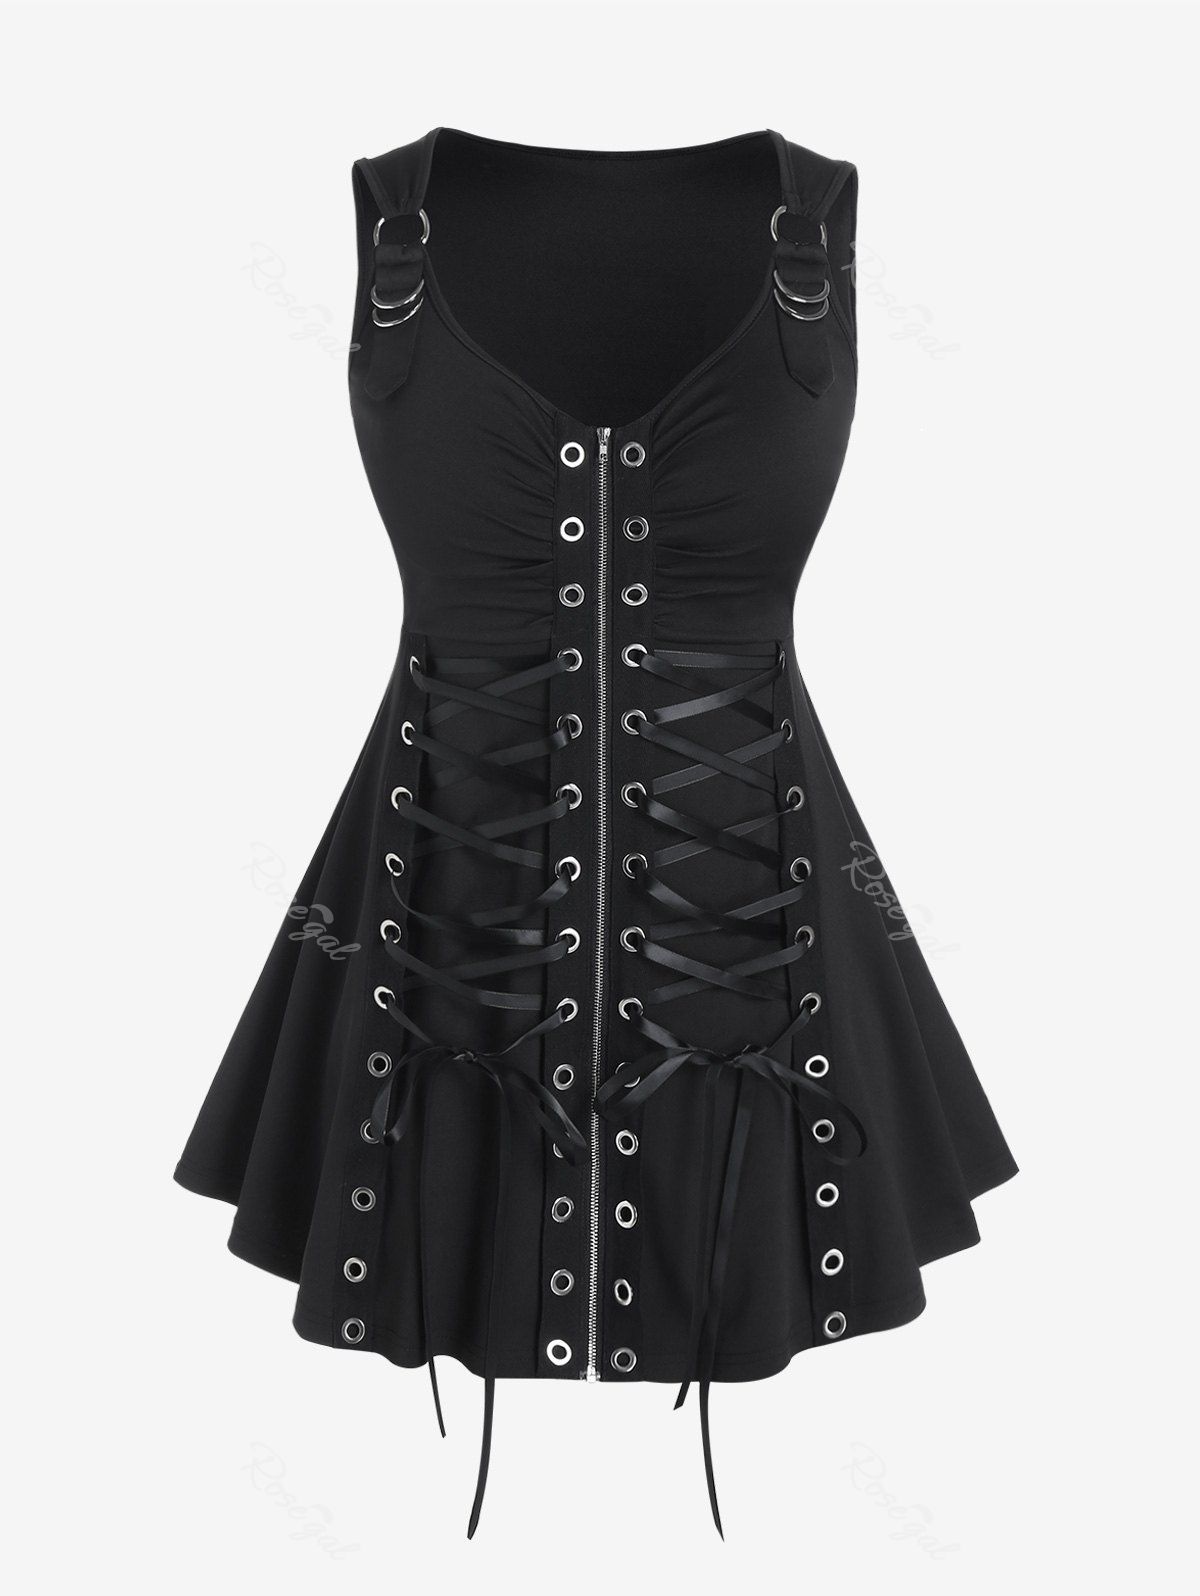 Buy Lace Up Grommets Full Zipper Gothic Tank Top  